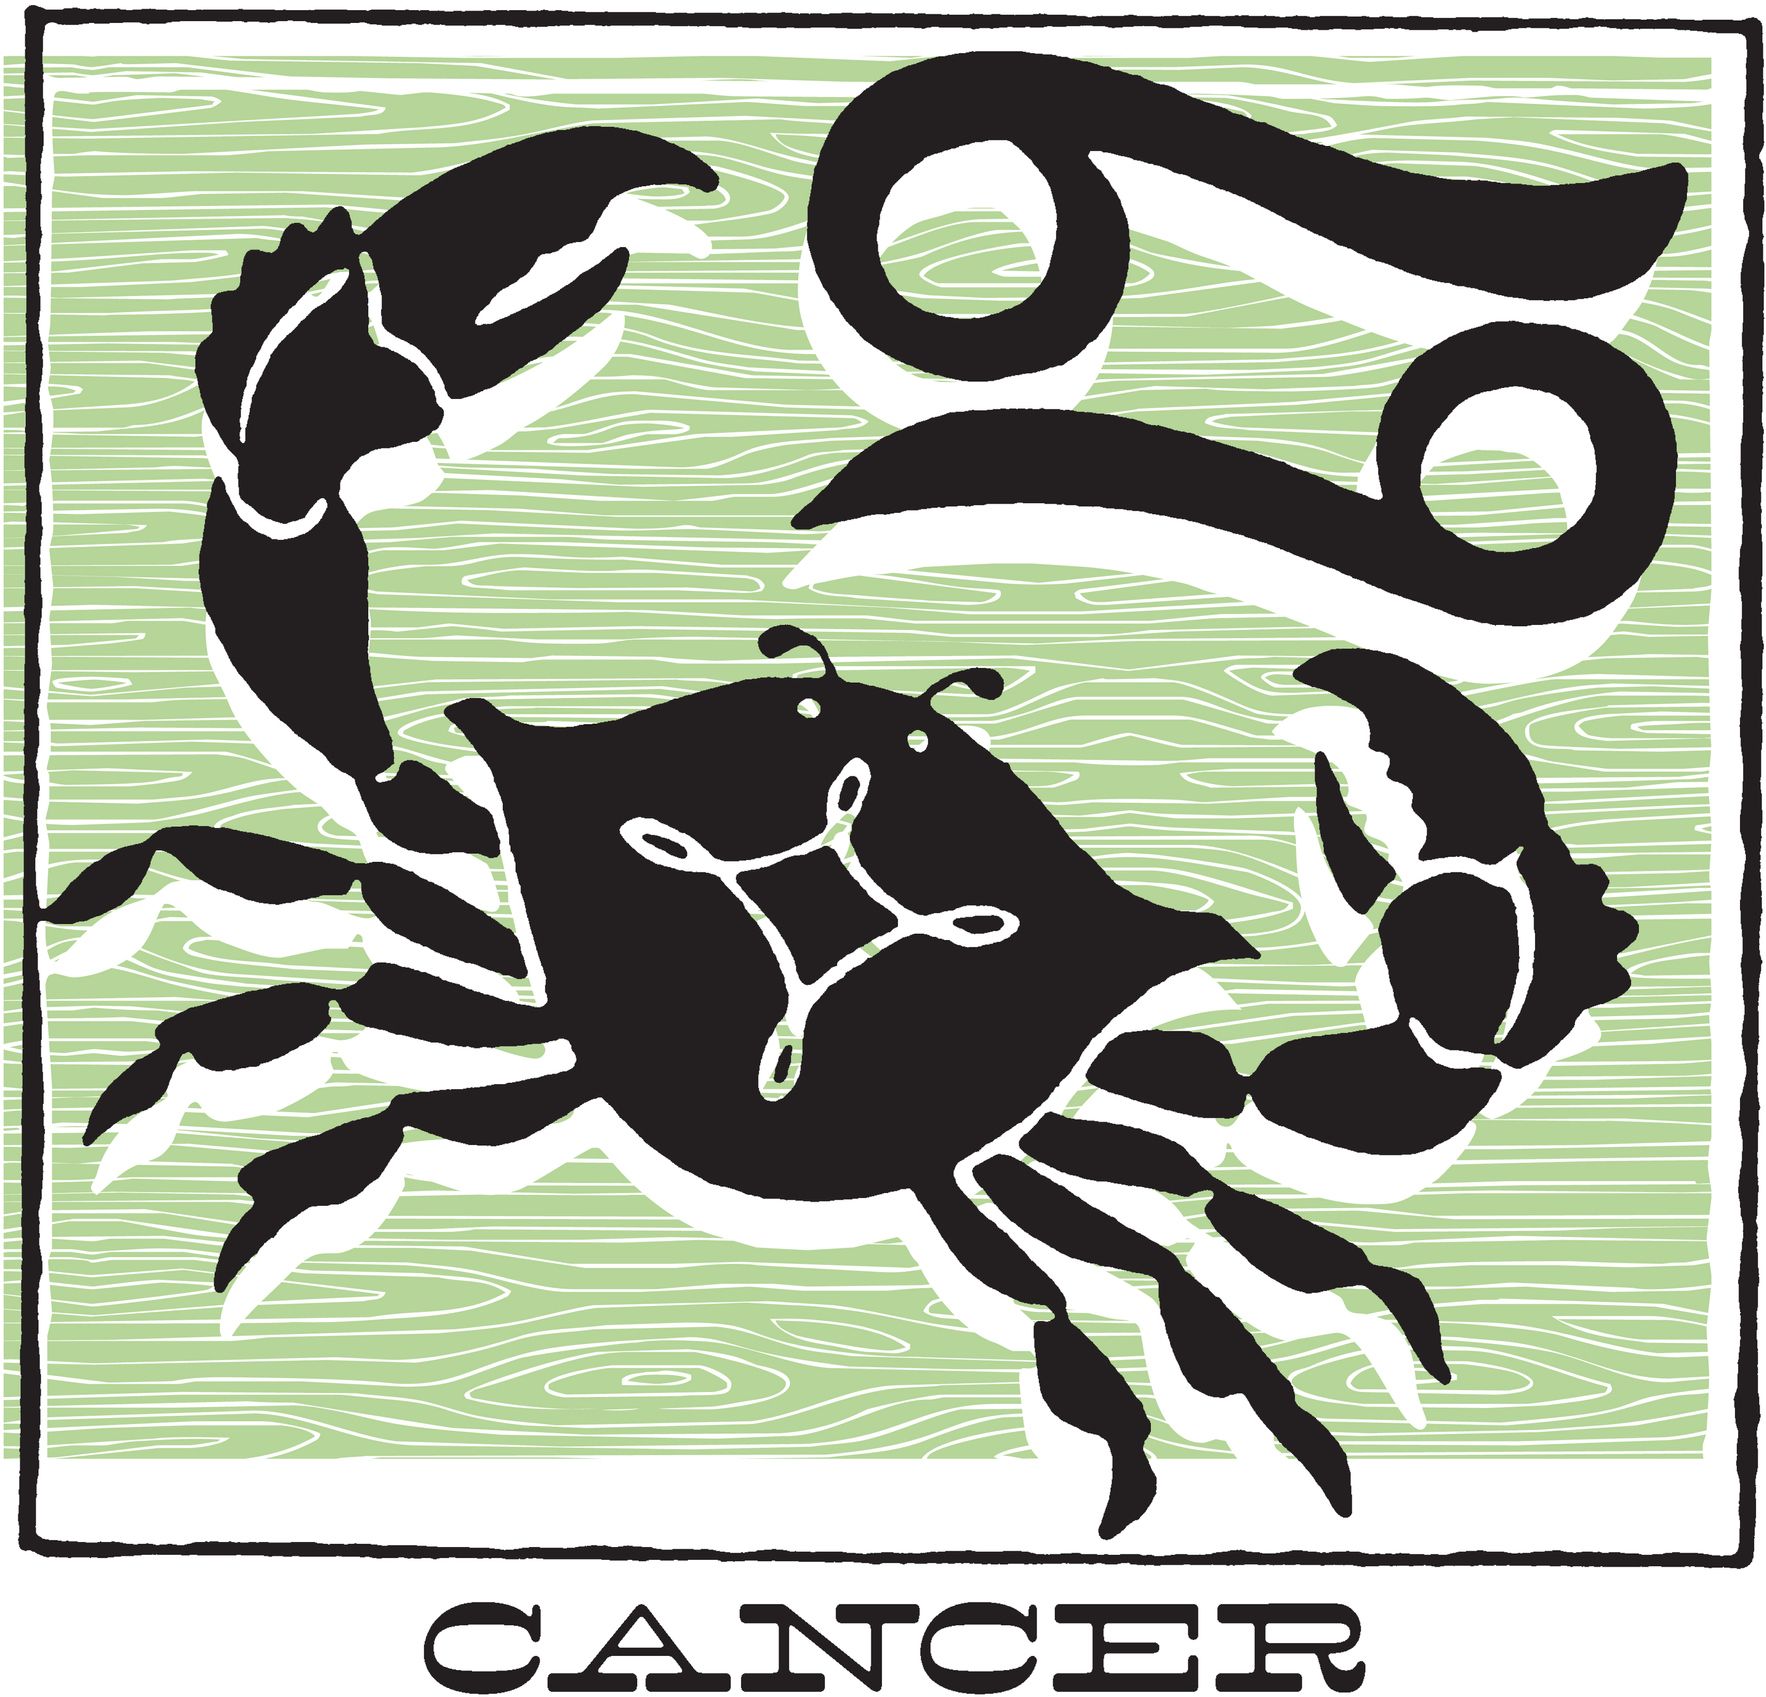 Image of a Cancer zodiac sign. | Source: Getty Images